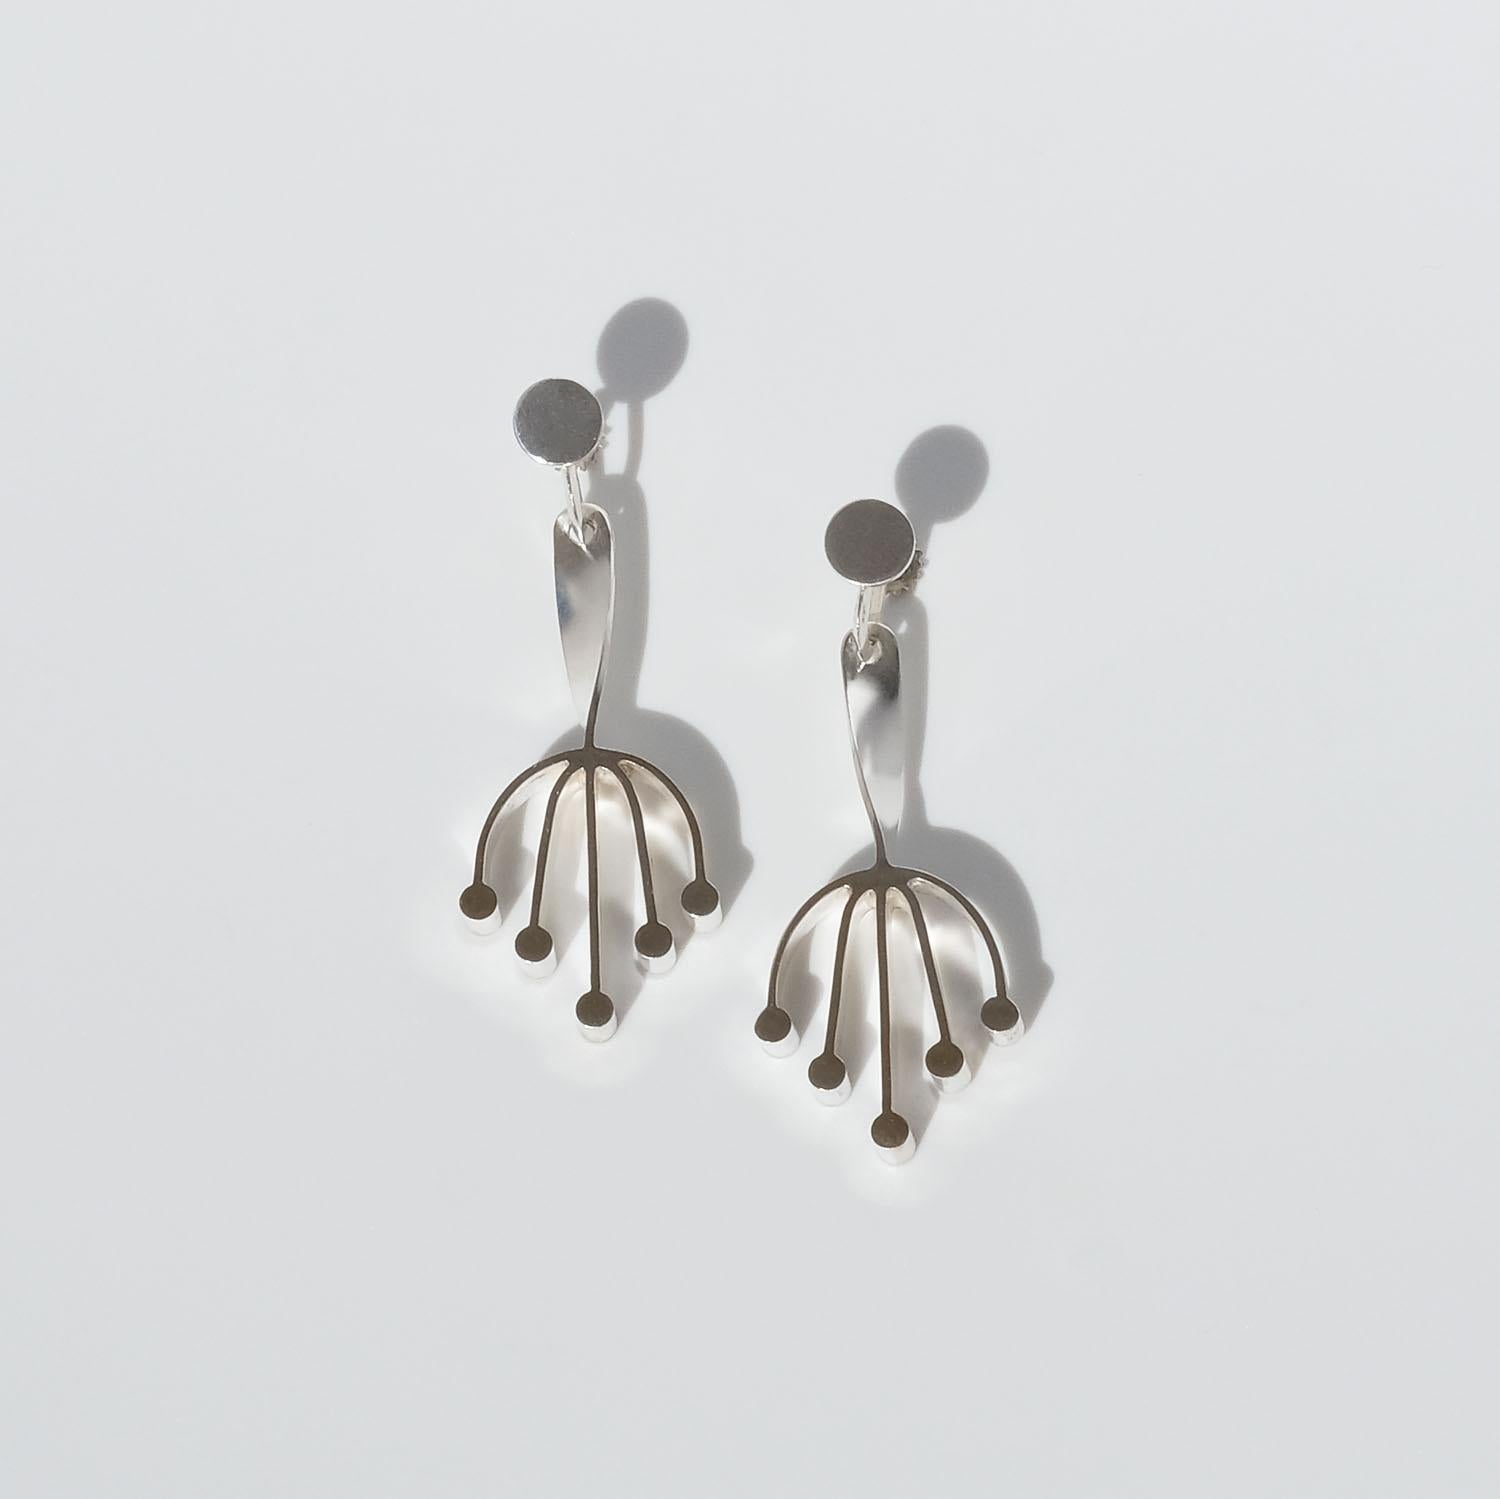 These silver earrings have a matte surface and gilded fronts, and with that they convey a certain elegance, but since the shape of the earrings is similar to a fairy tale toad foot, they also have a playful look. The shafts of the earrings are